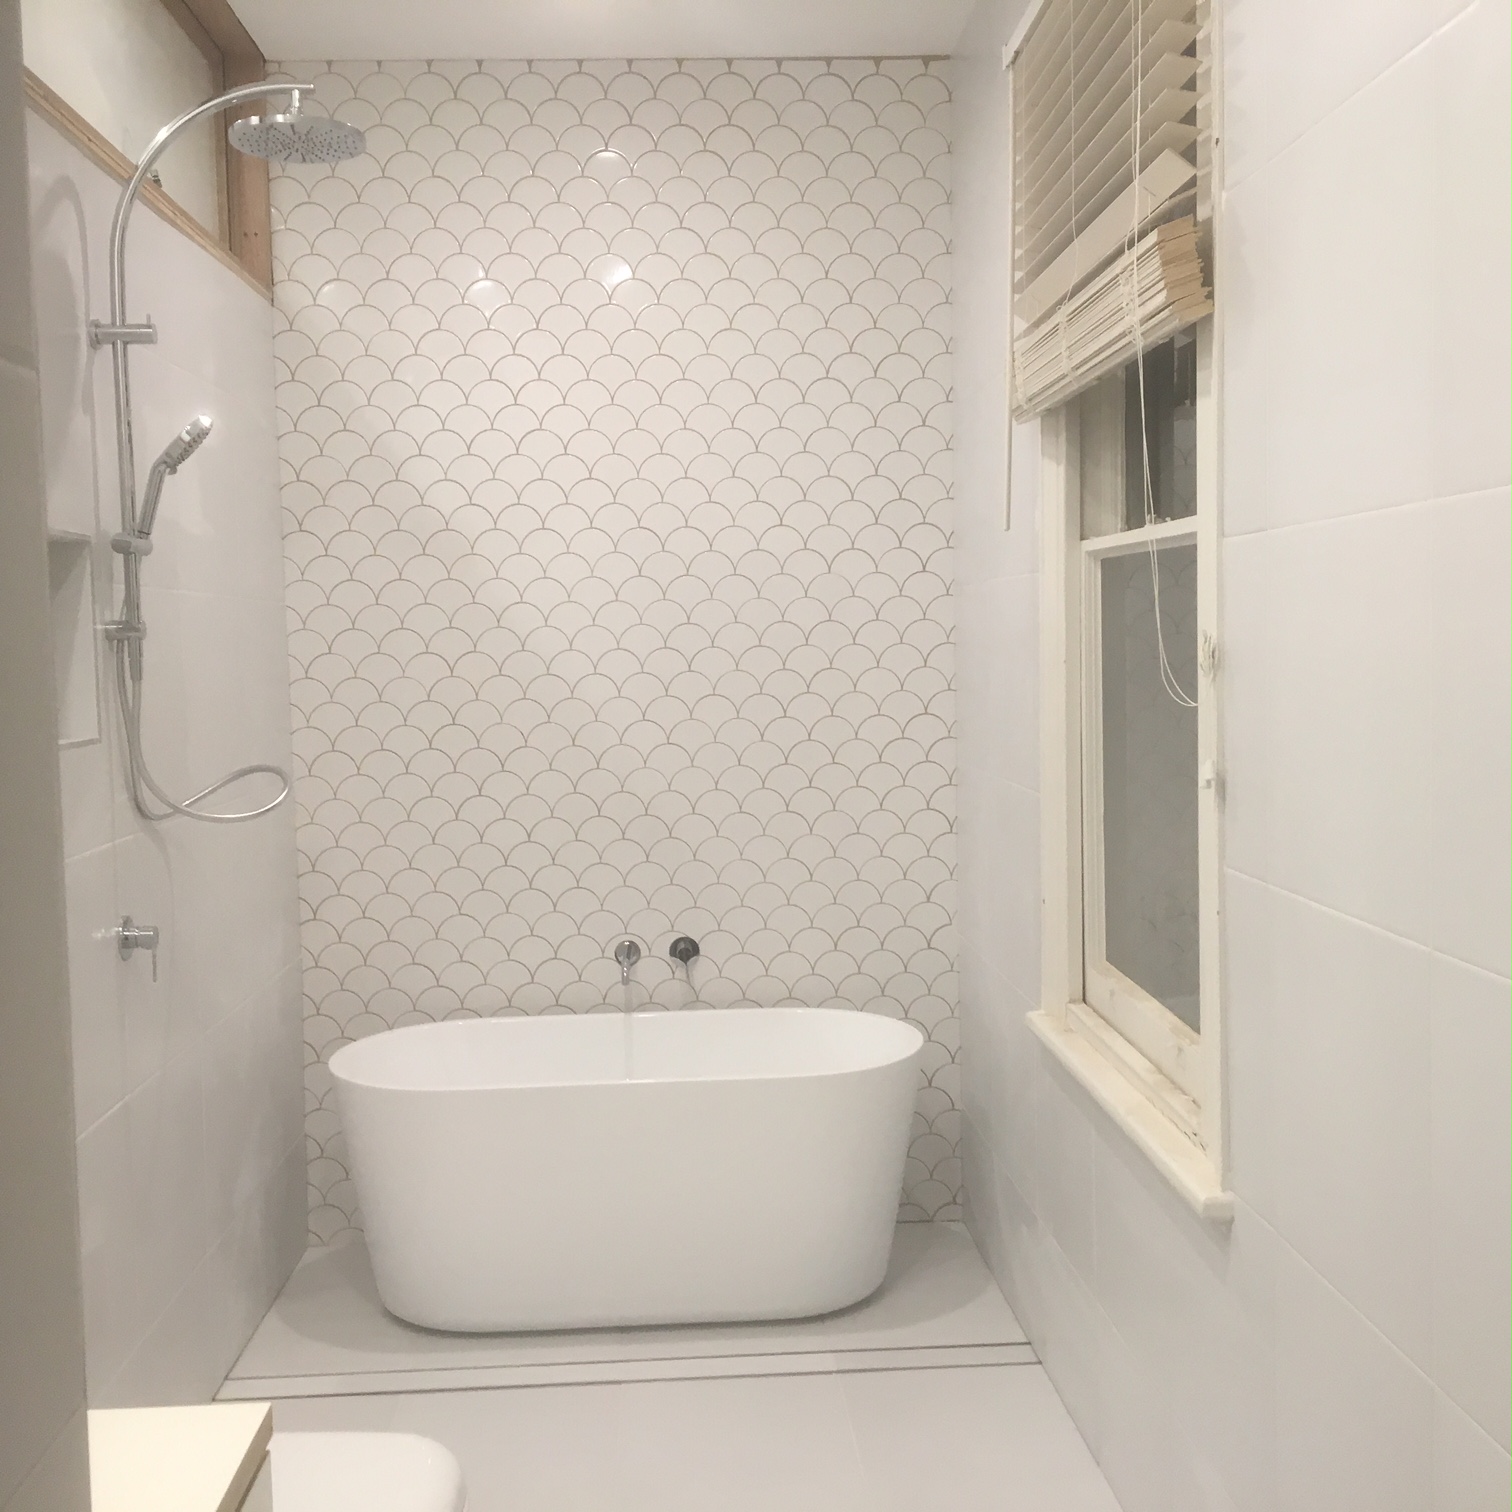 Does Your Bathroom Tiling Need Waterproofing?